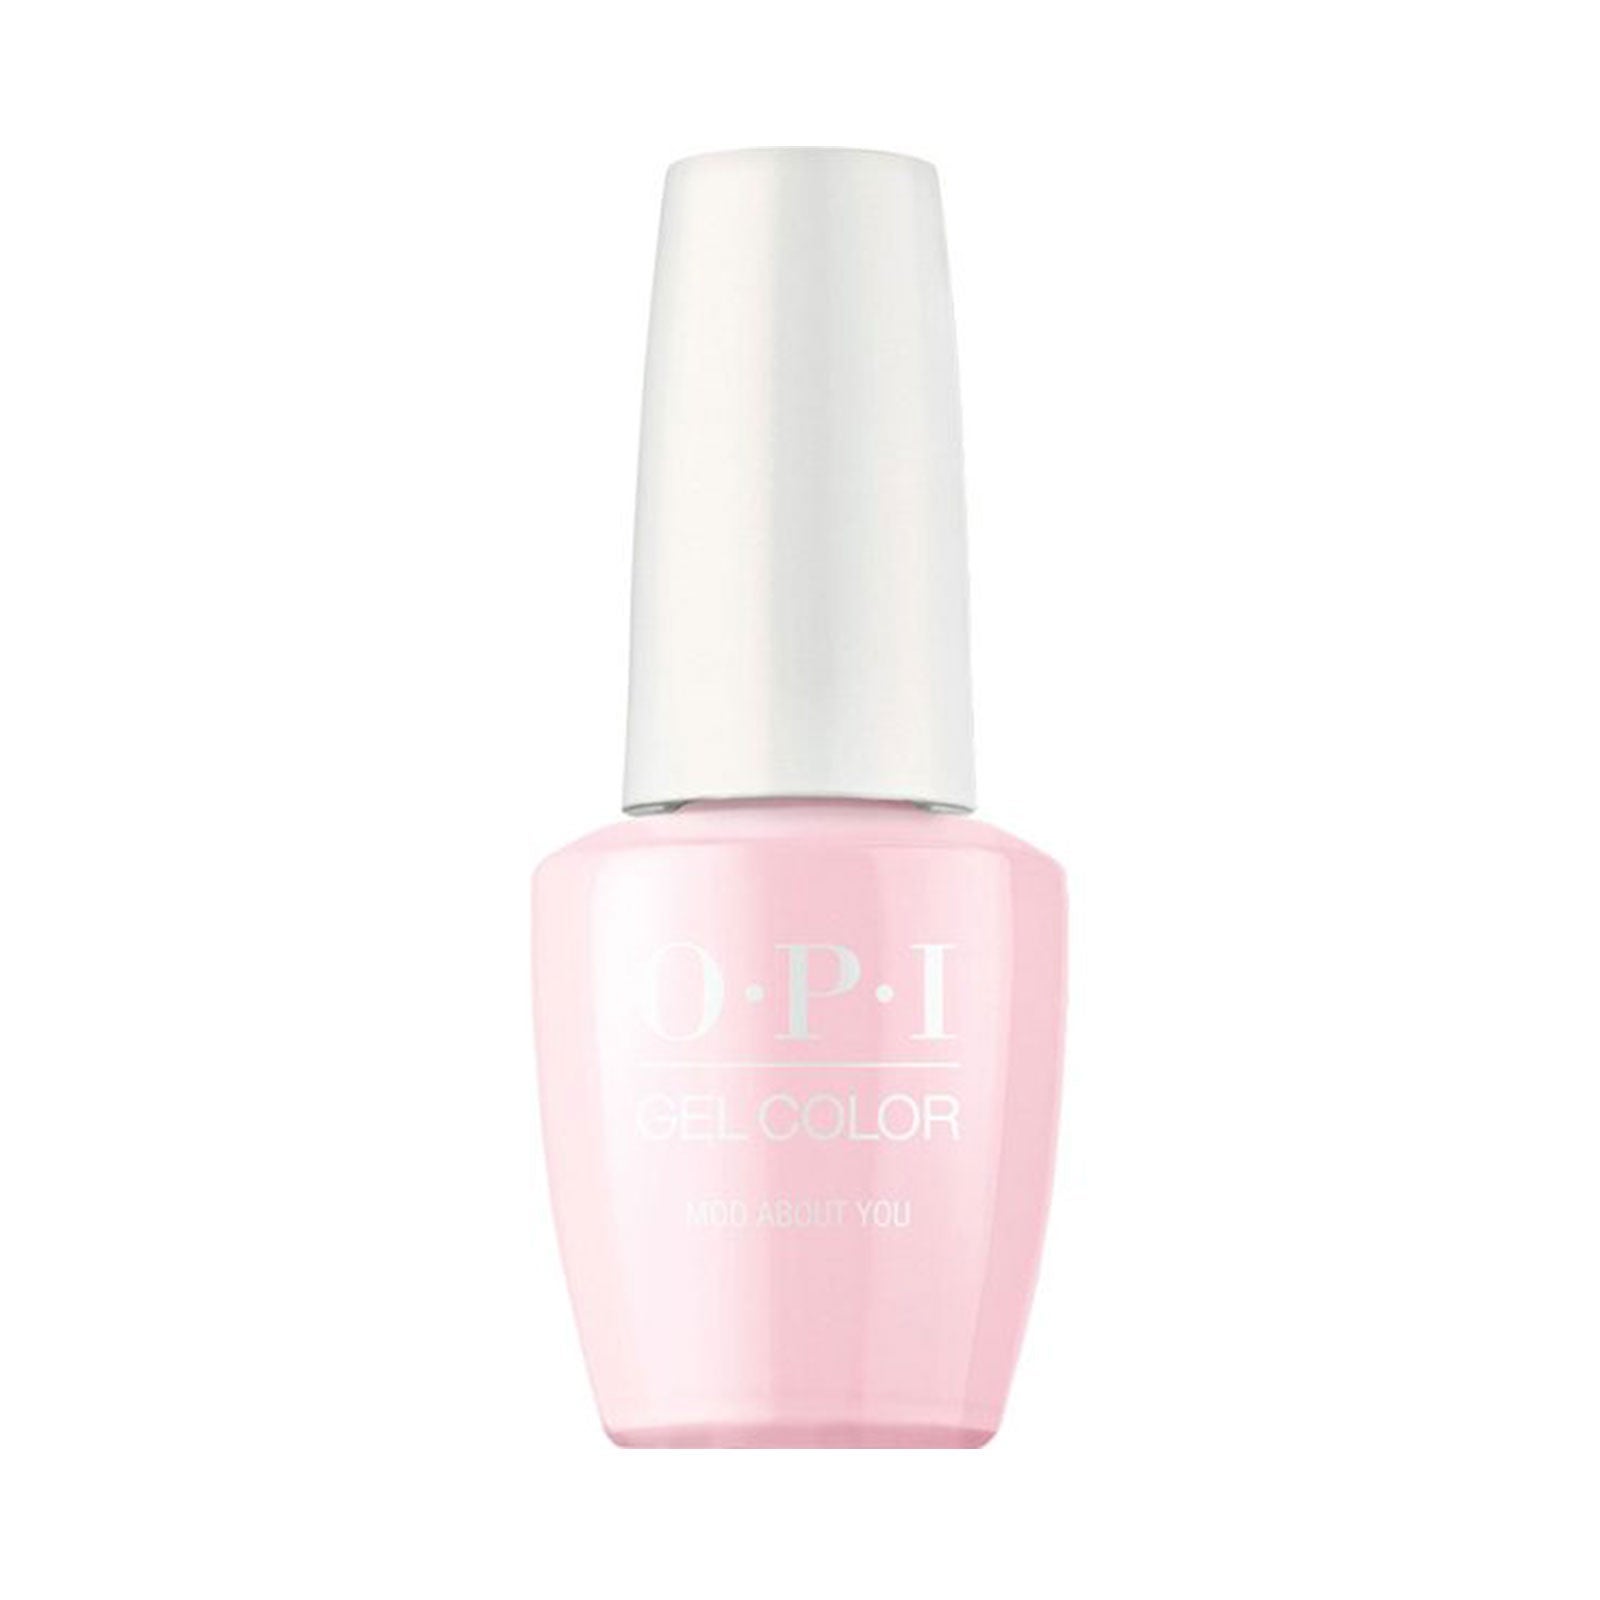 OPI GelColor GCB56 Mod About You 15ml